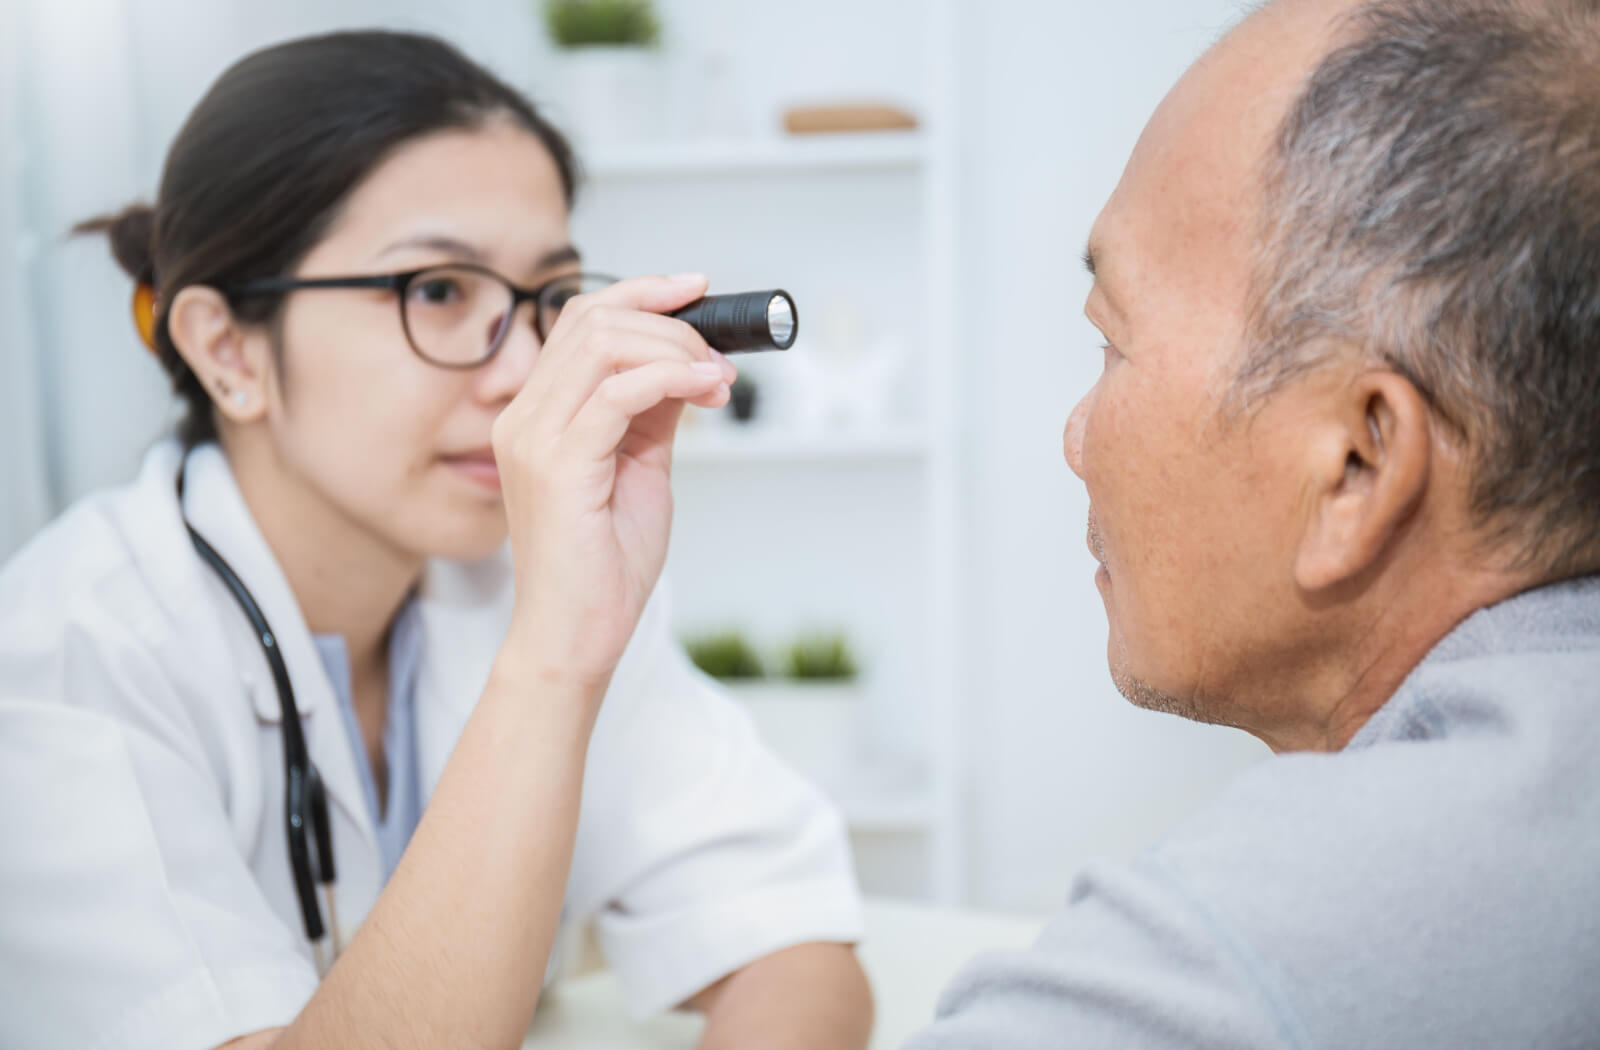 Optometrist looking at a male patient's eye with a light.